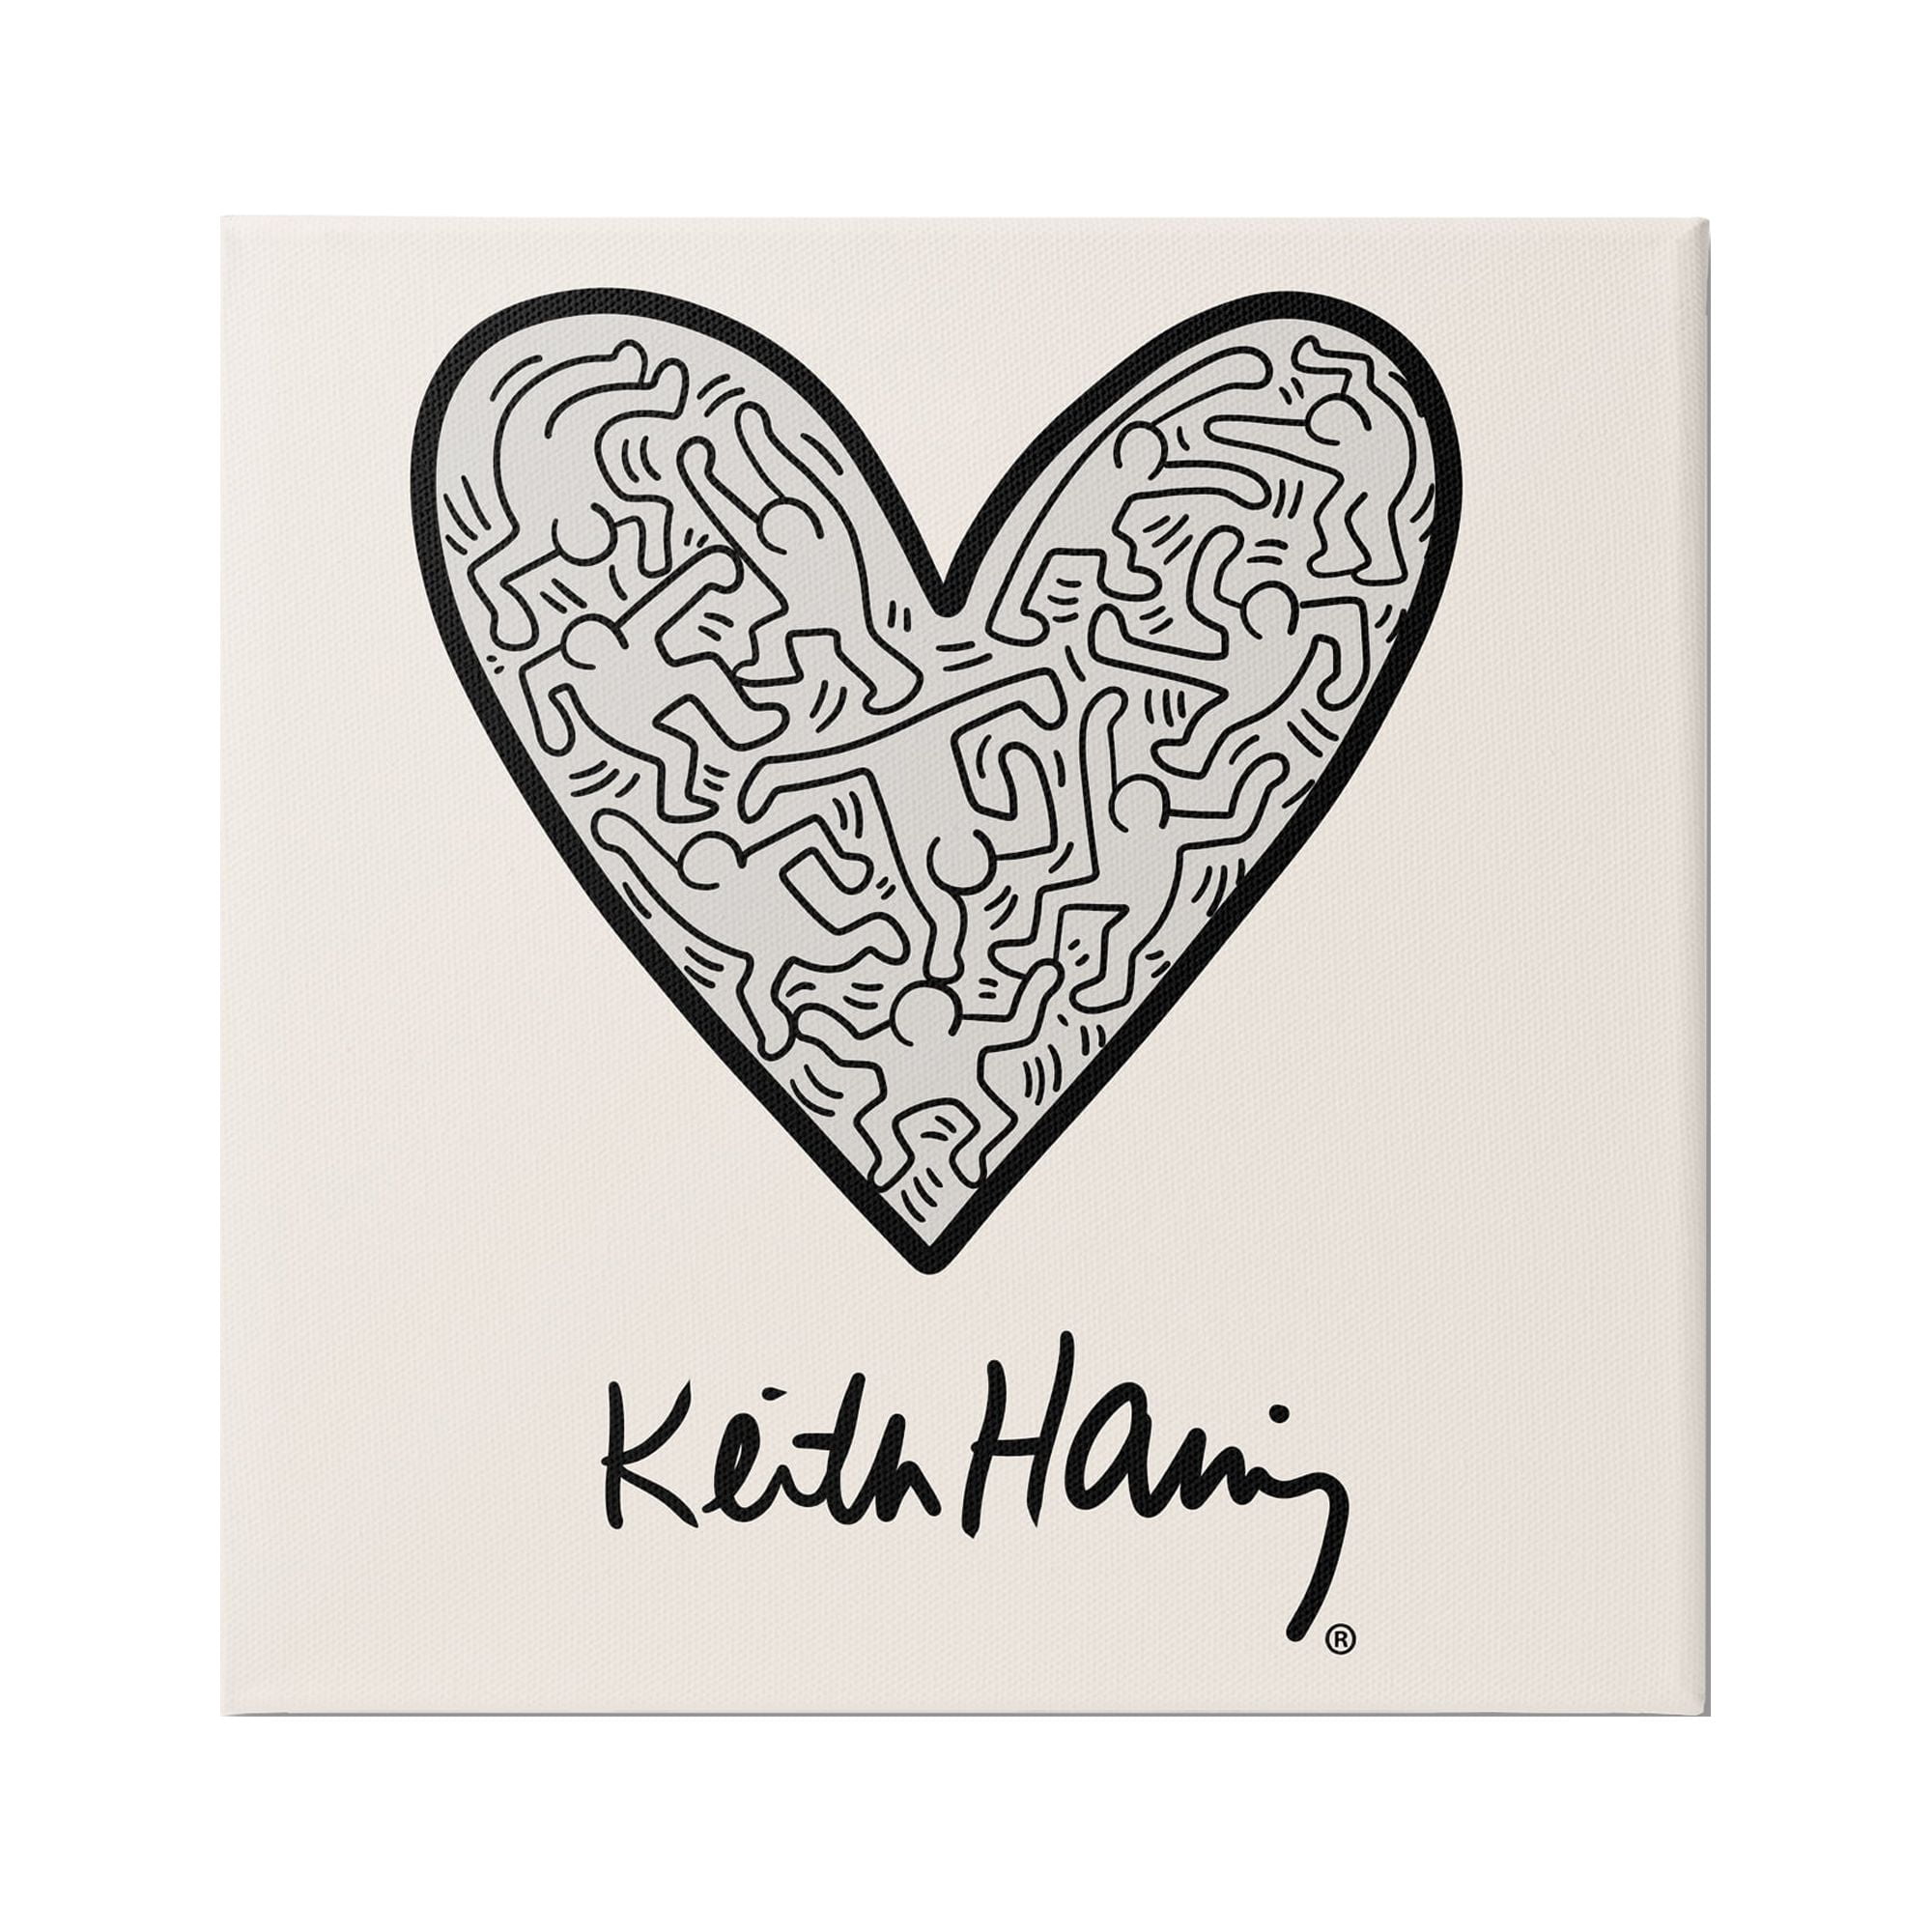 Stupell industries keith haring people inside heart pattern text framed wall art x design by ros ruseva